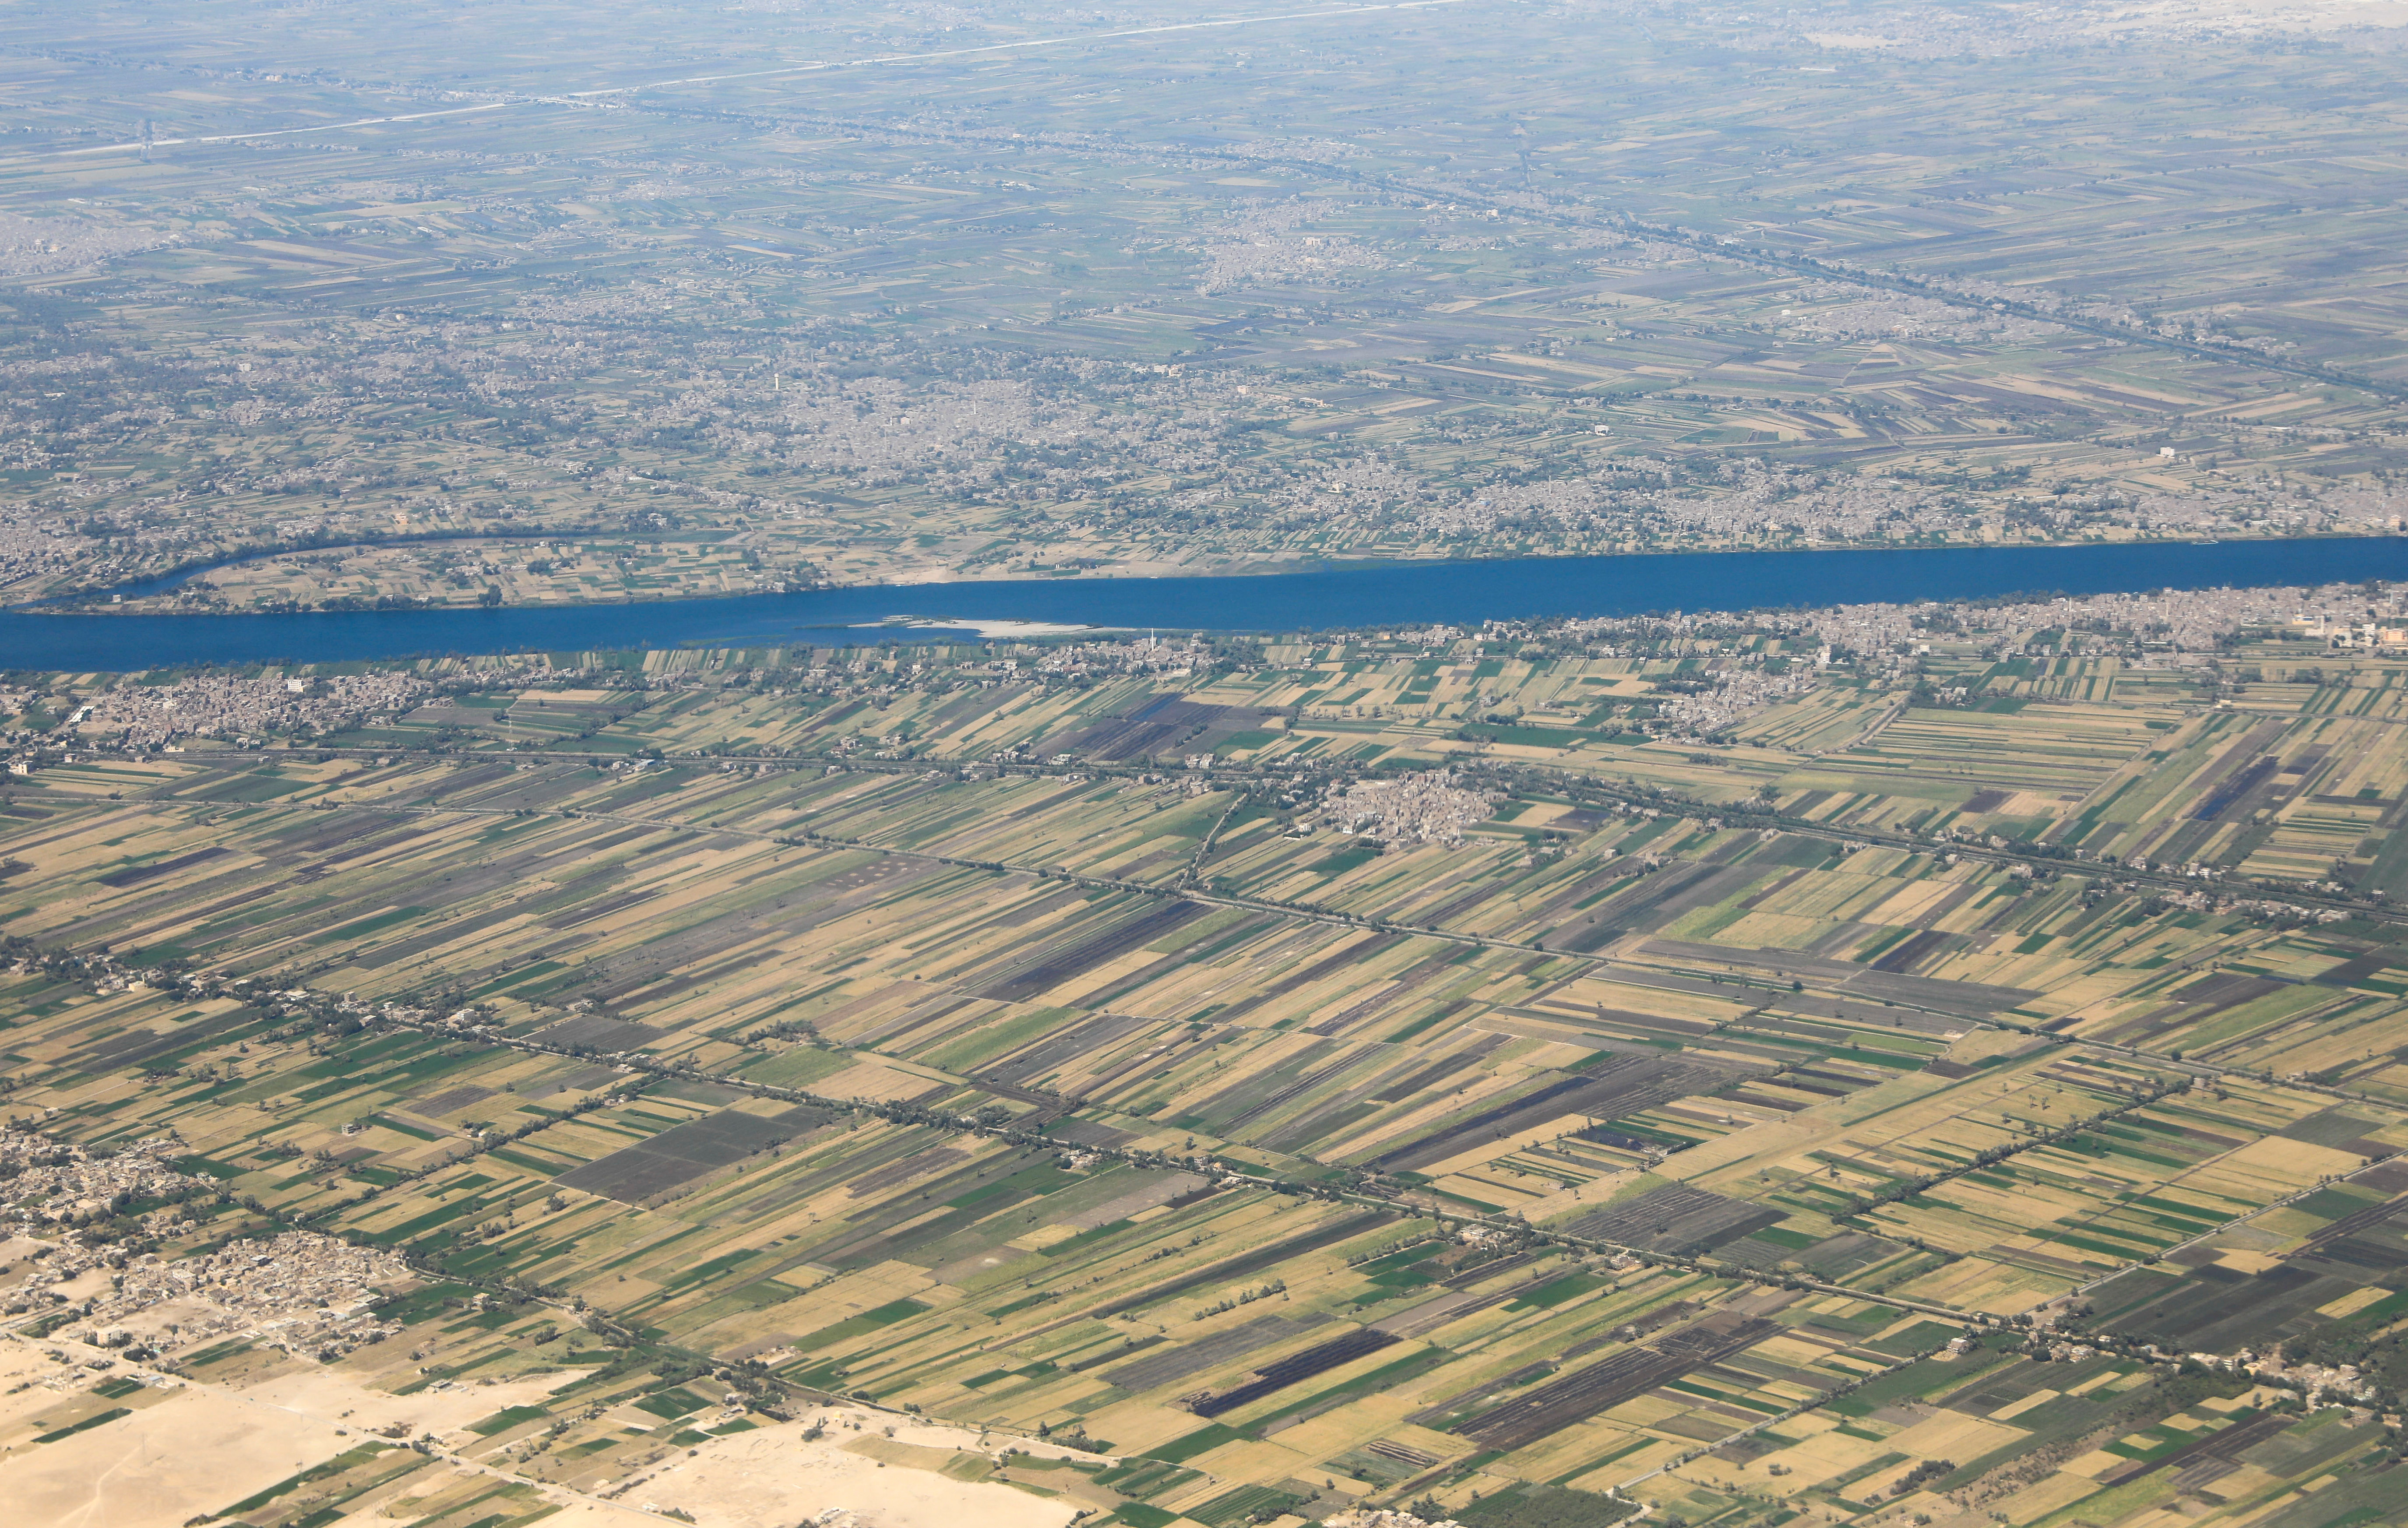 Aerial view of the River Nile valley and desert